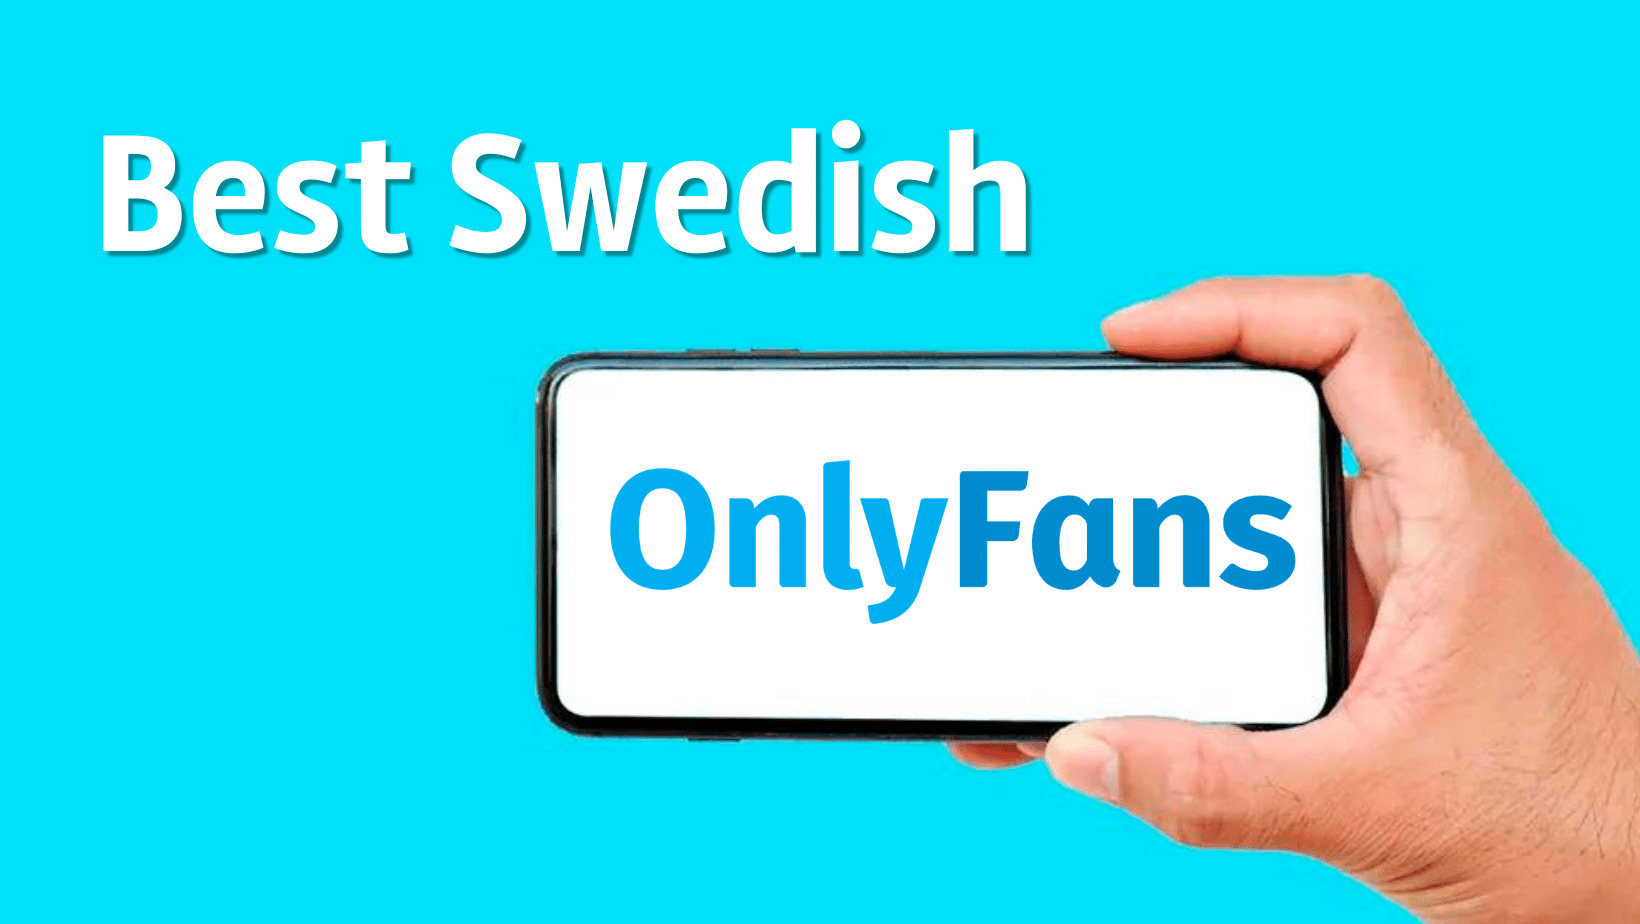 13 Sexiest Swedish Onlyfans Models